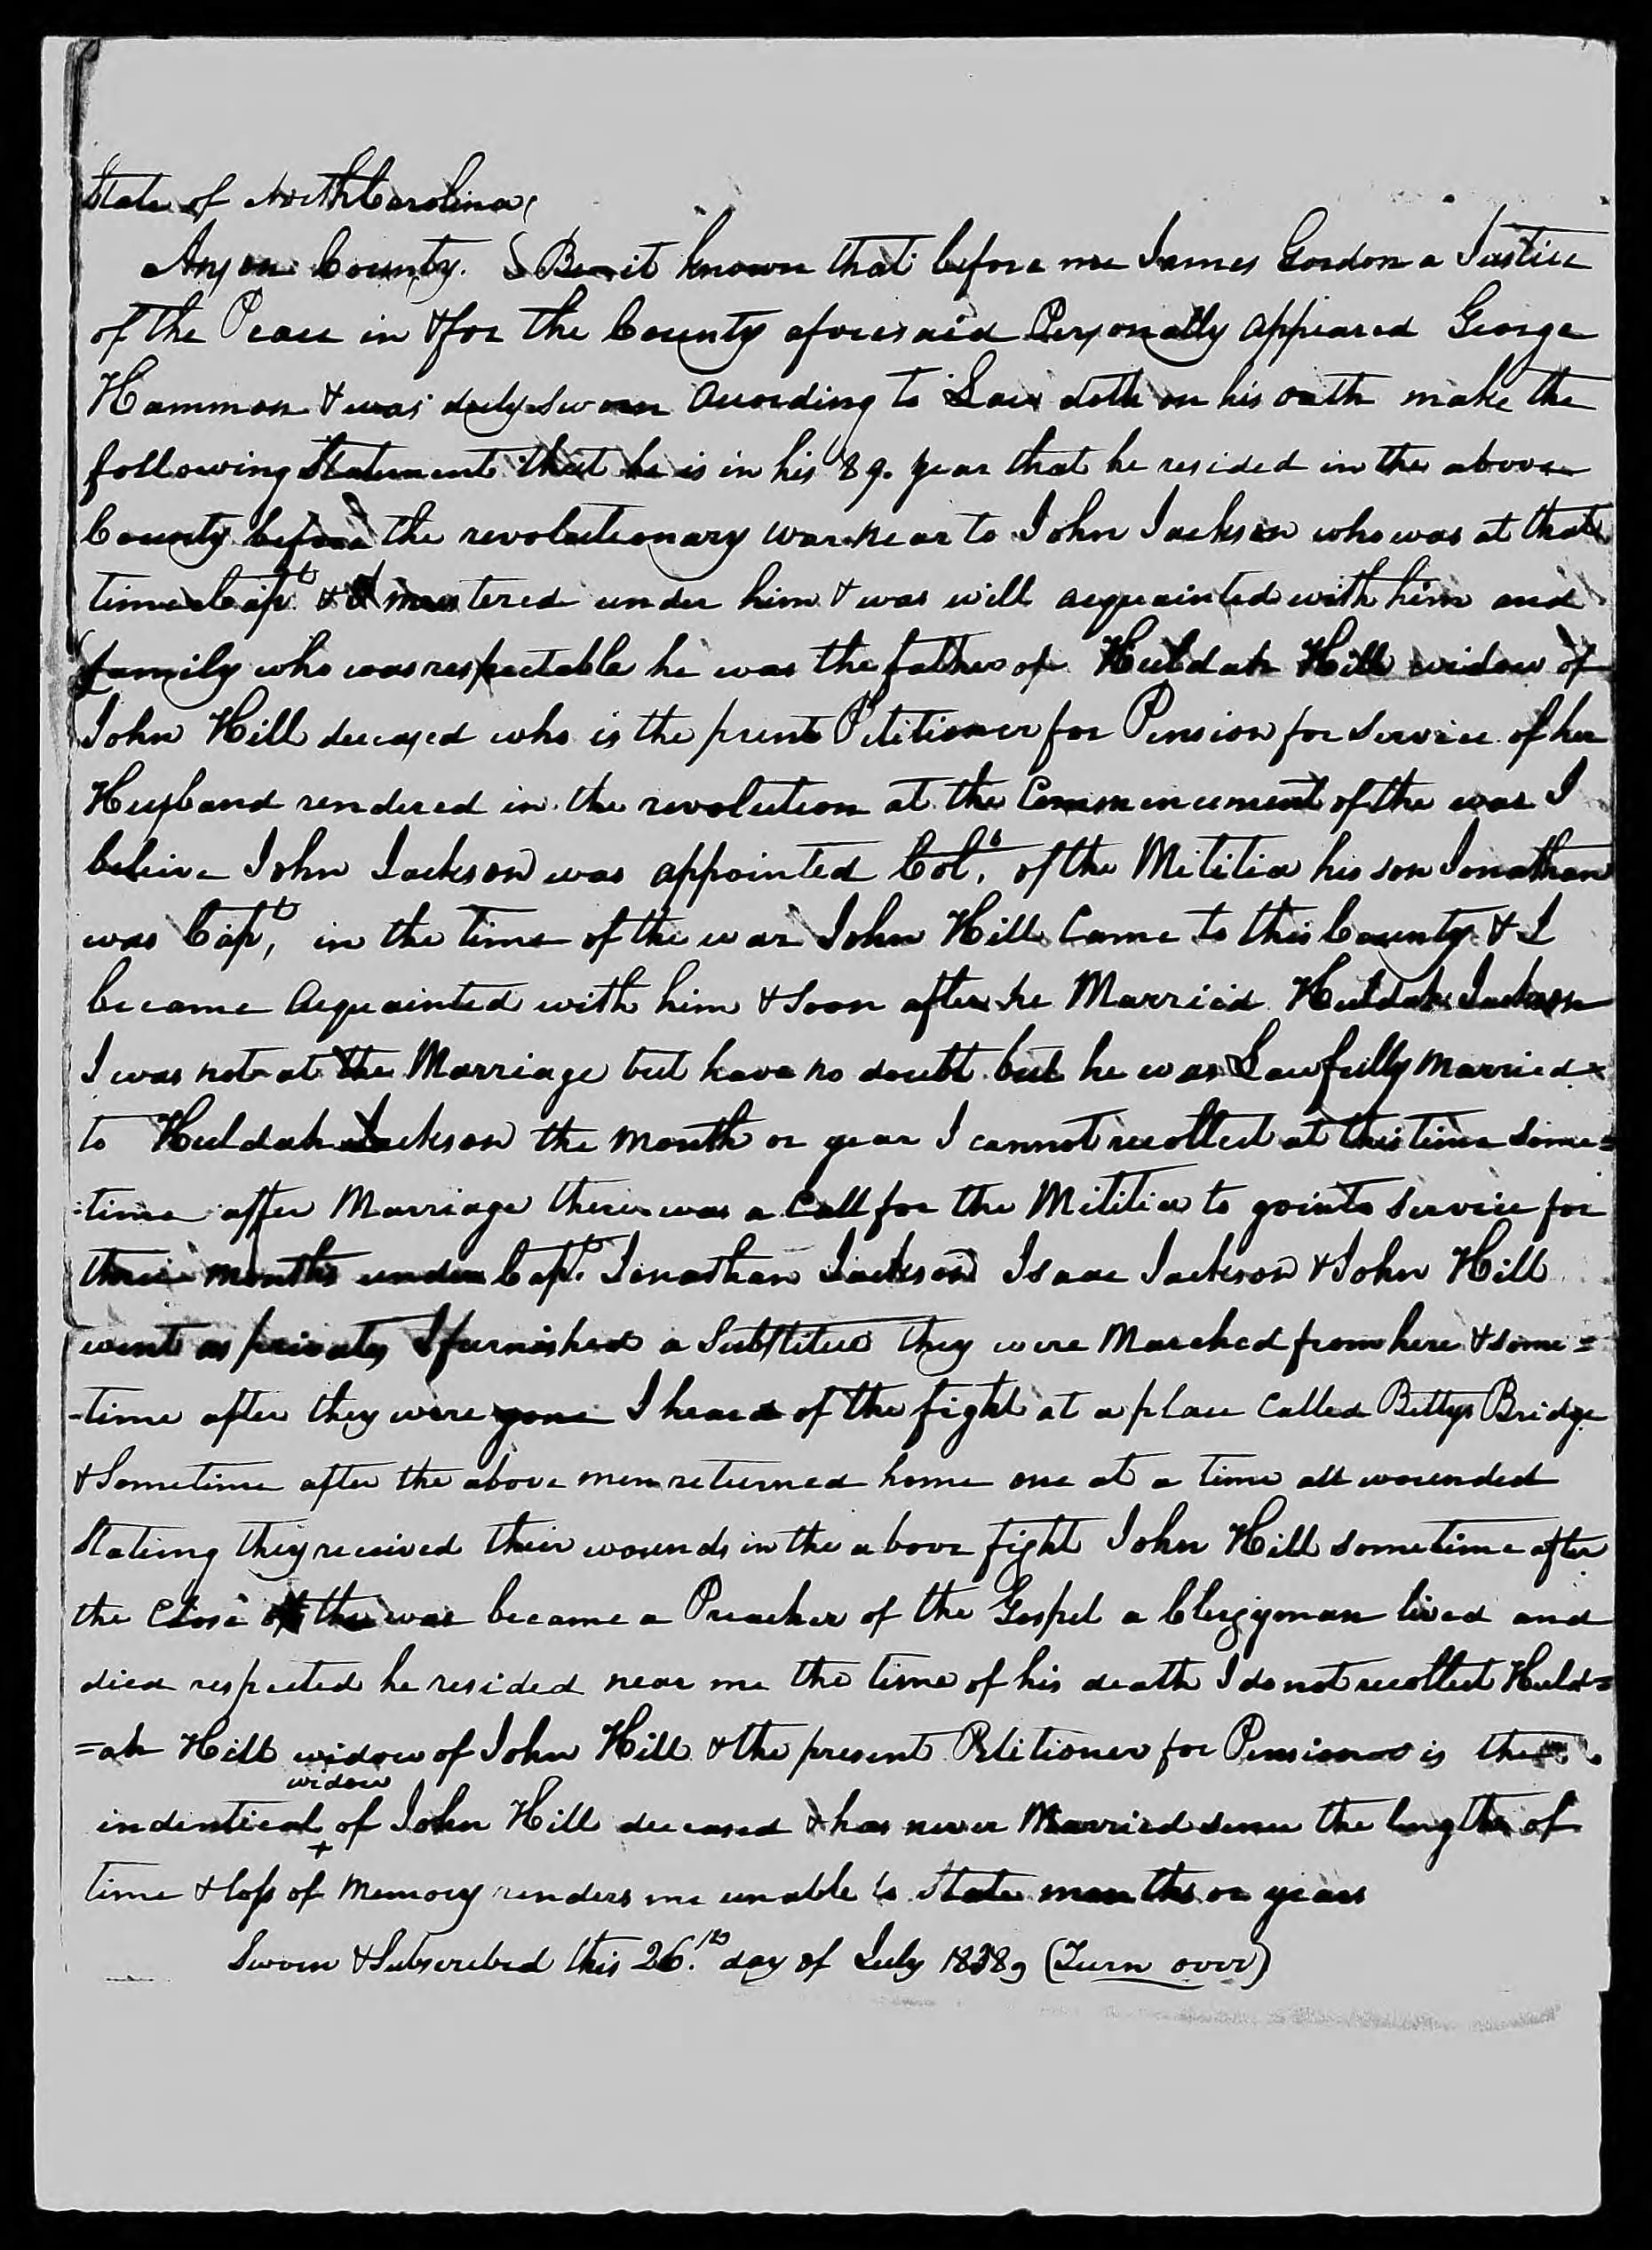 Affidavit of George Hammon in support of a Pension Claim for Huldah Hill, 26 July 1838, page 1